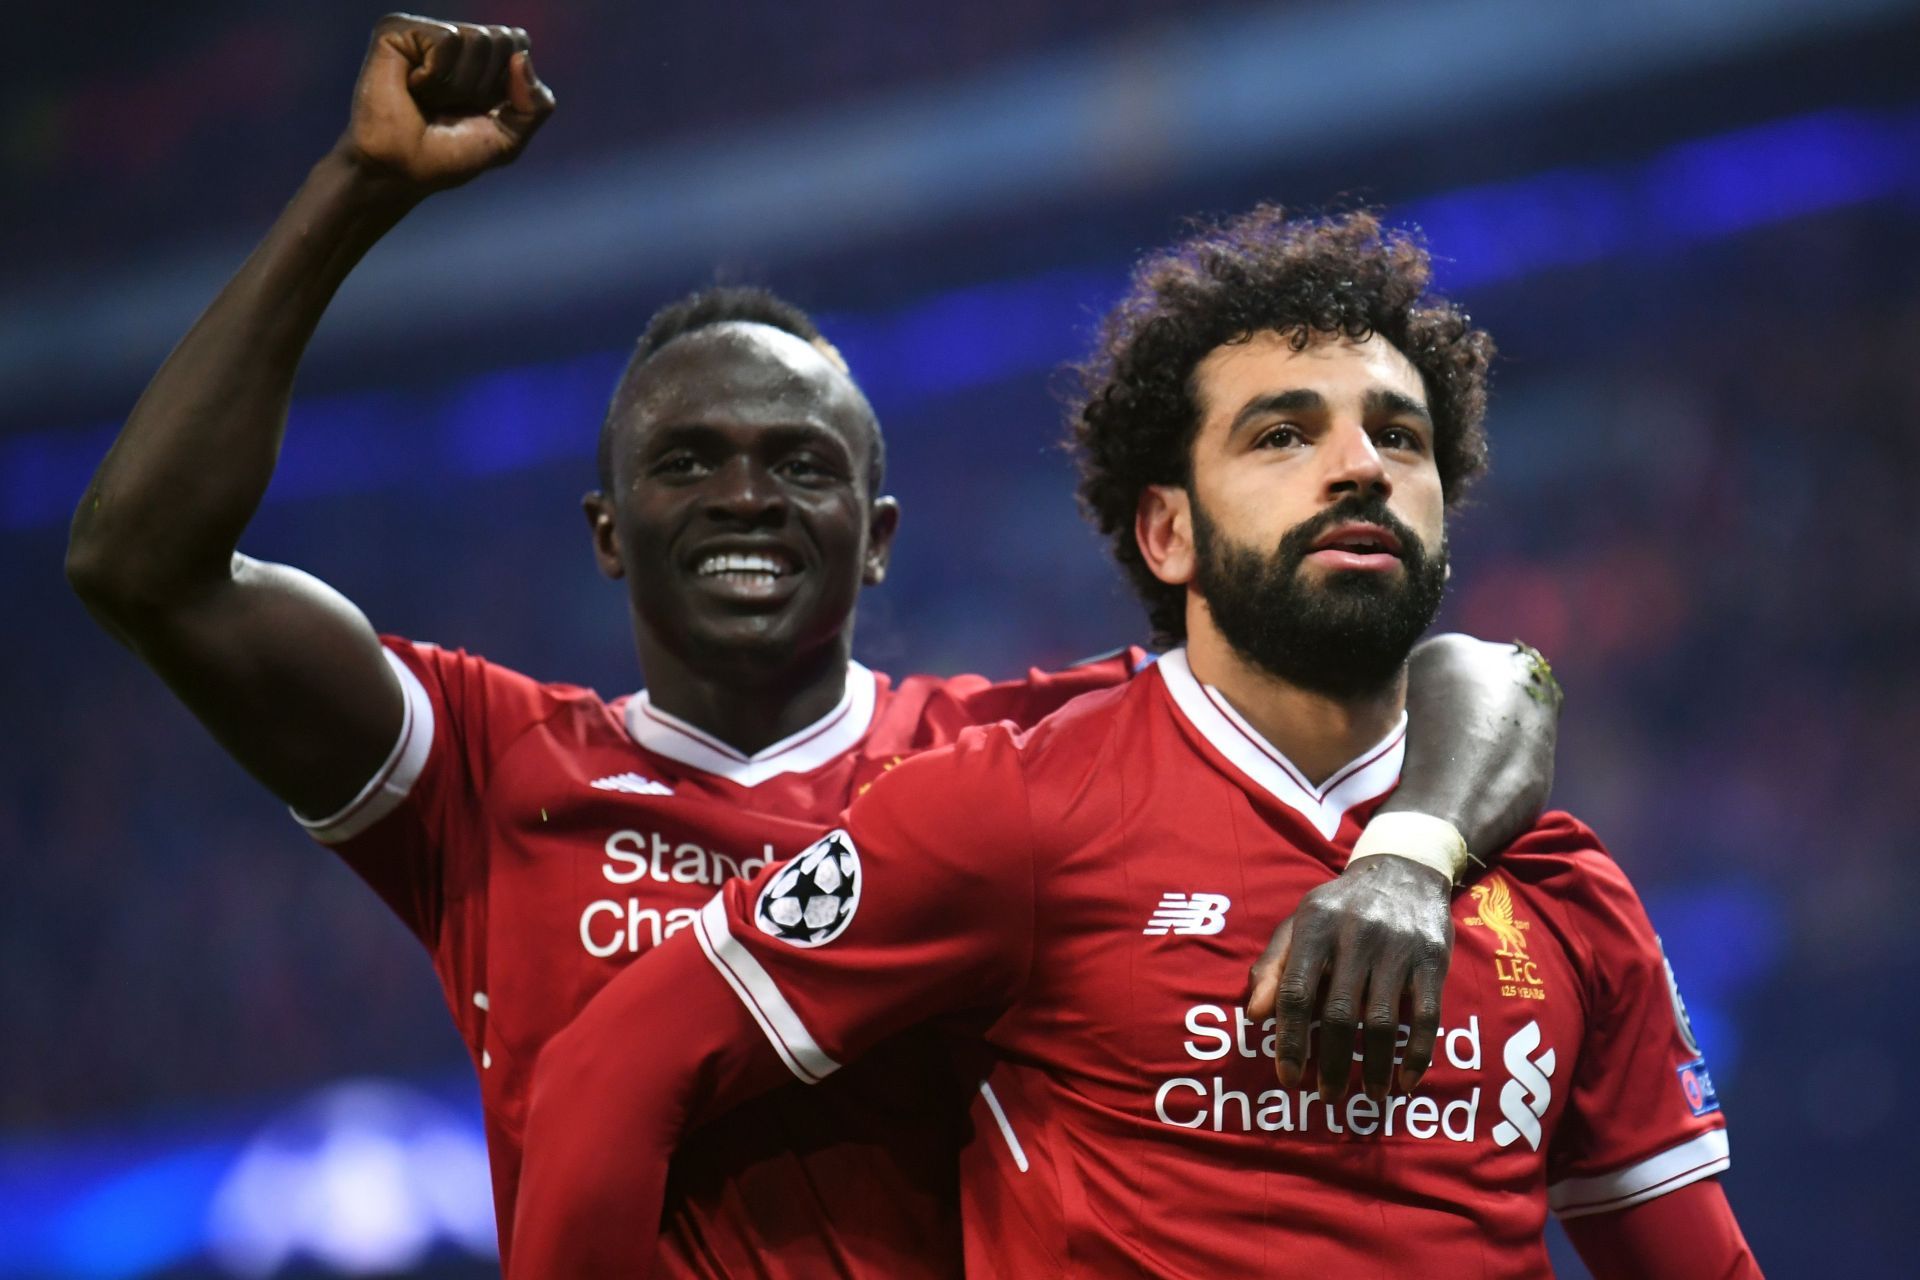 Mane and Salah battled it out in the final of AFCON